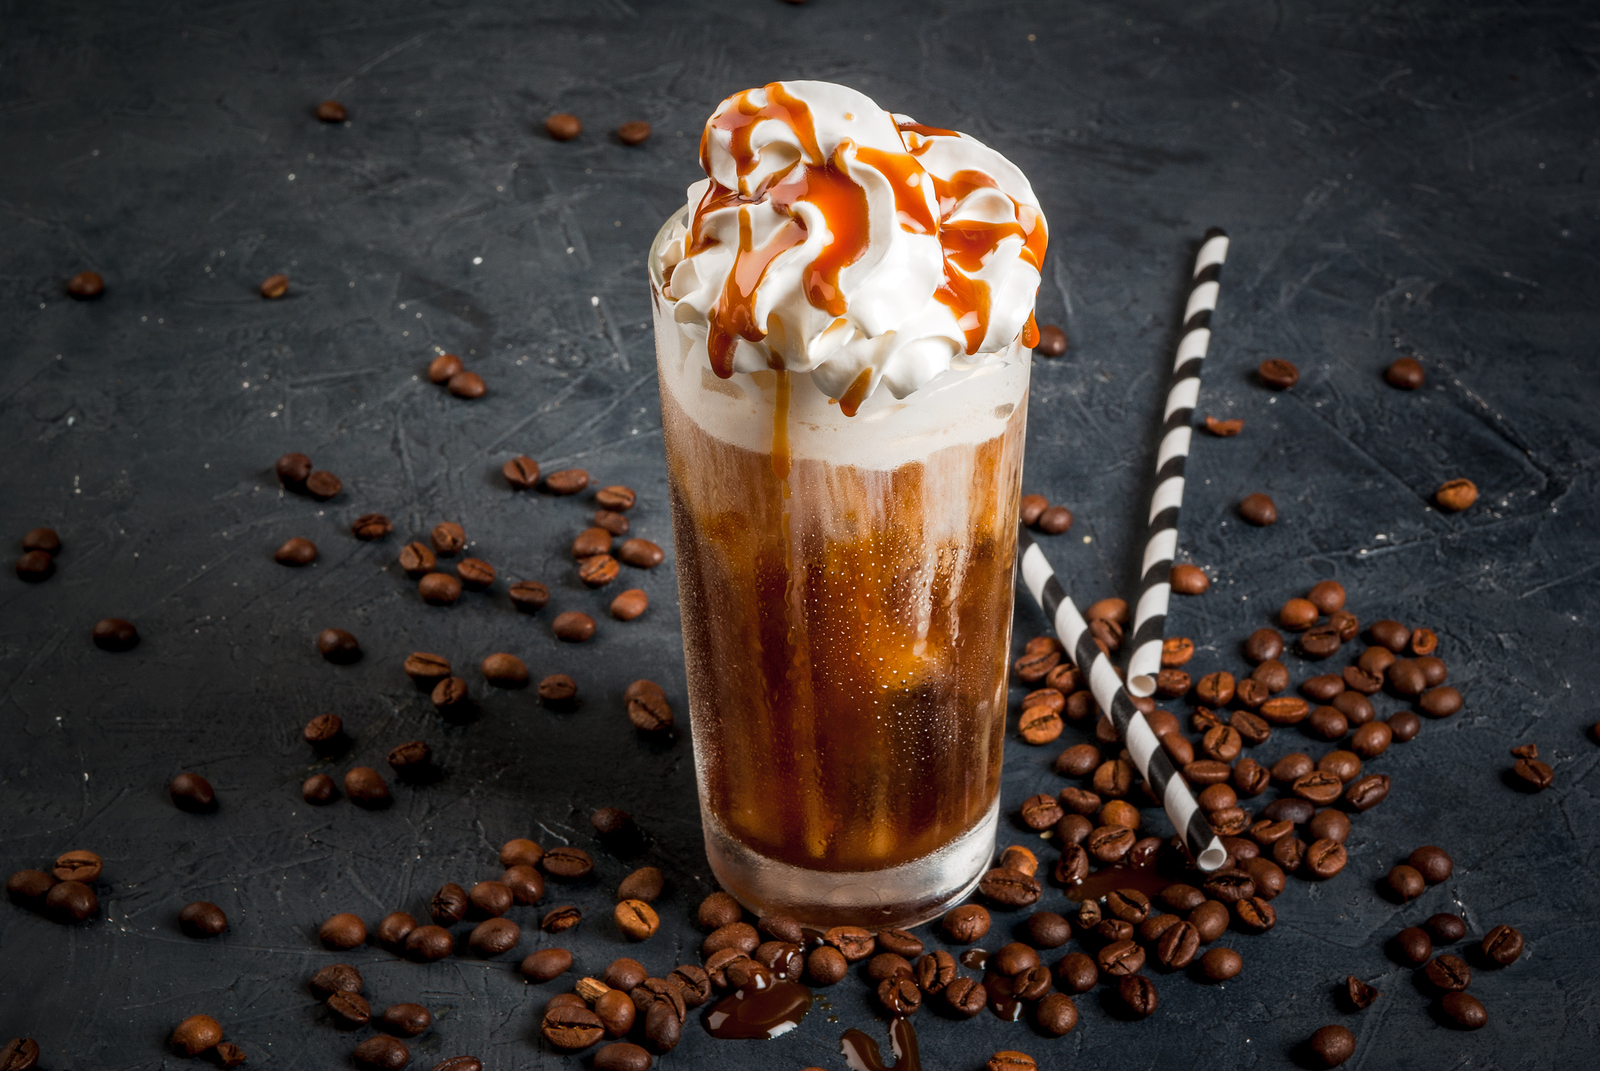 A Starbucks frap is filled with calories, carbs, and sugar.